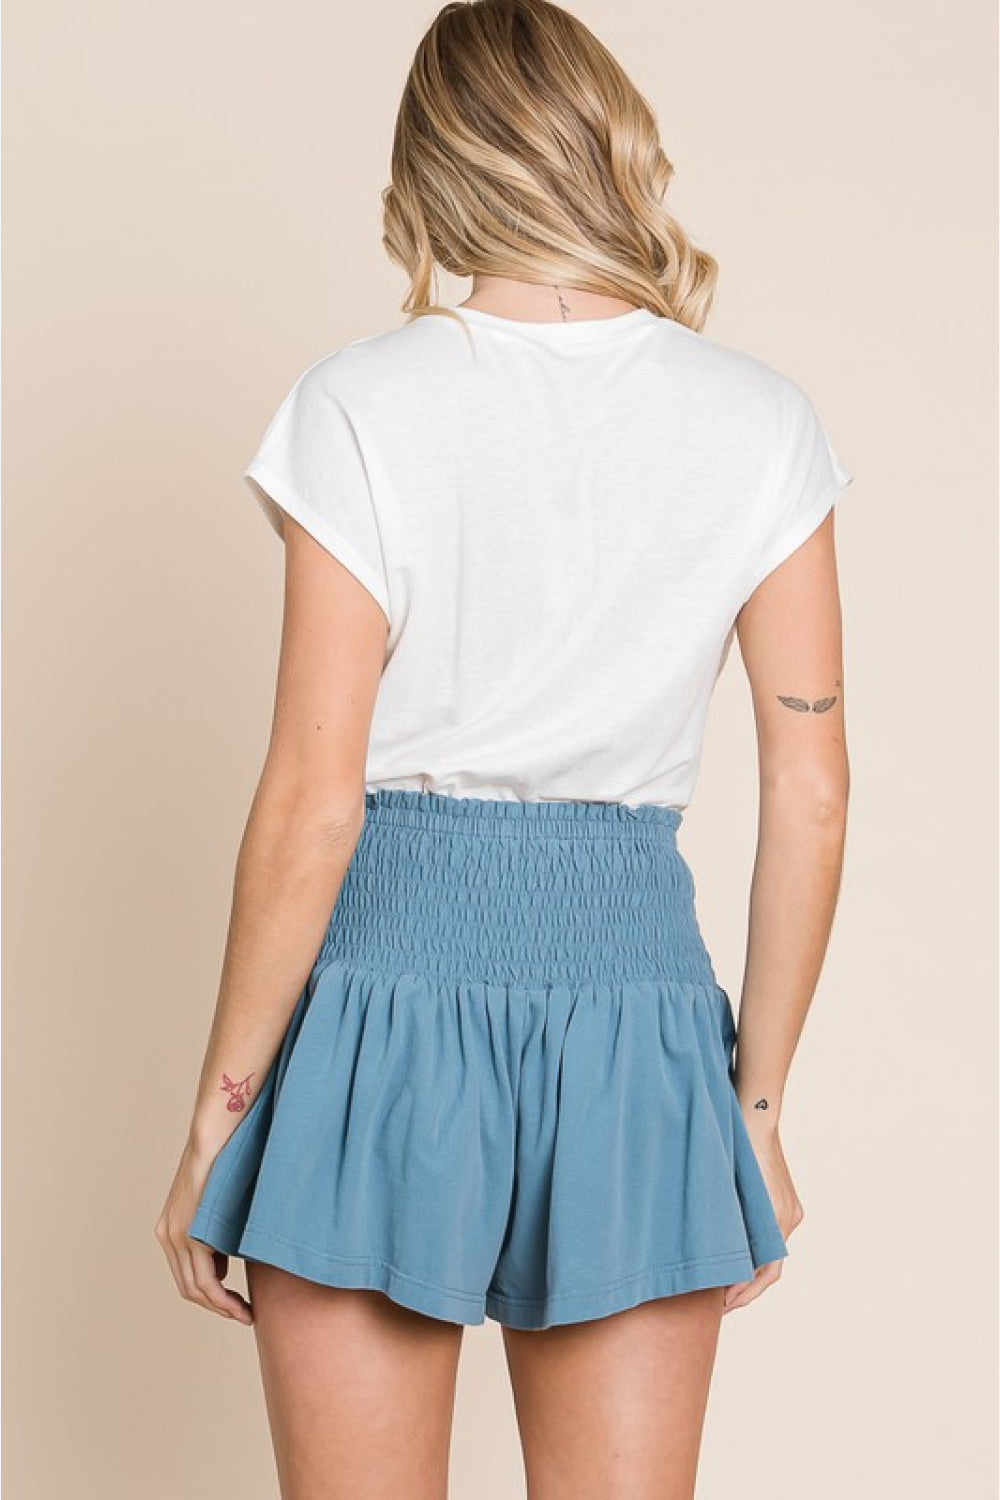 Full Size Life's A Highway Mineral Washed Smocked Shorts